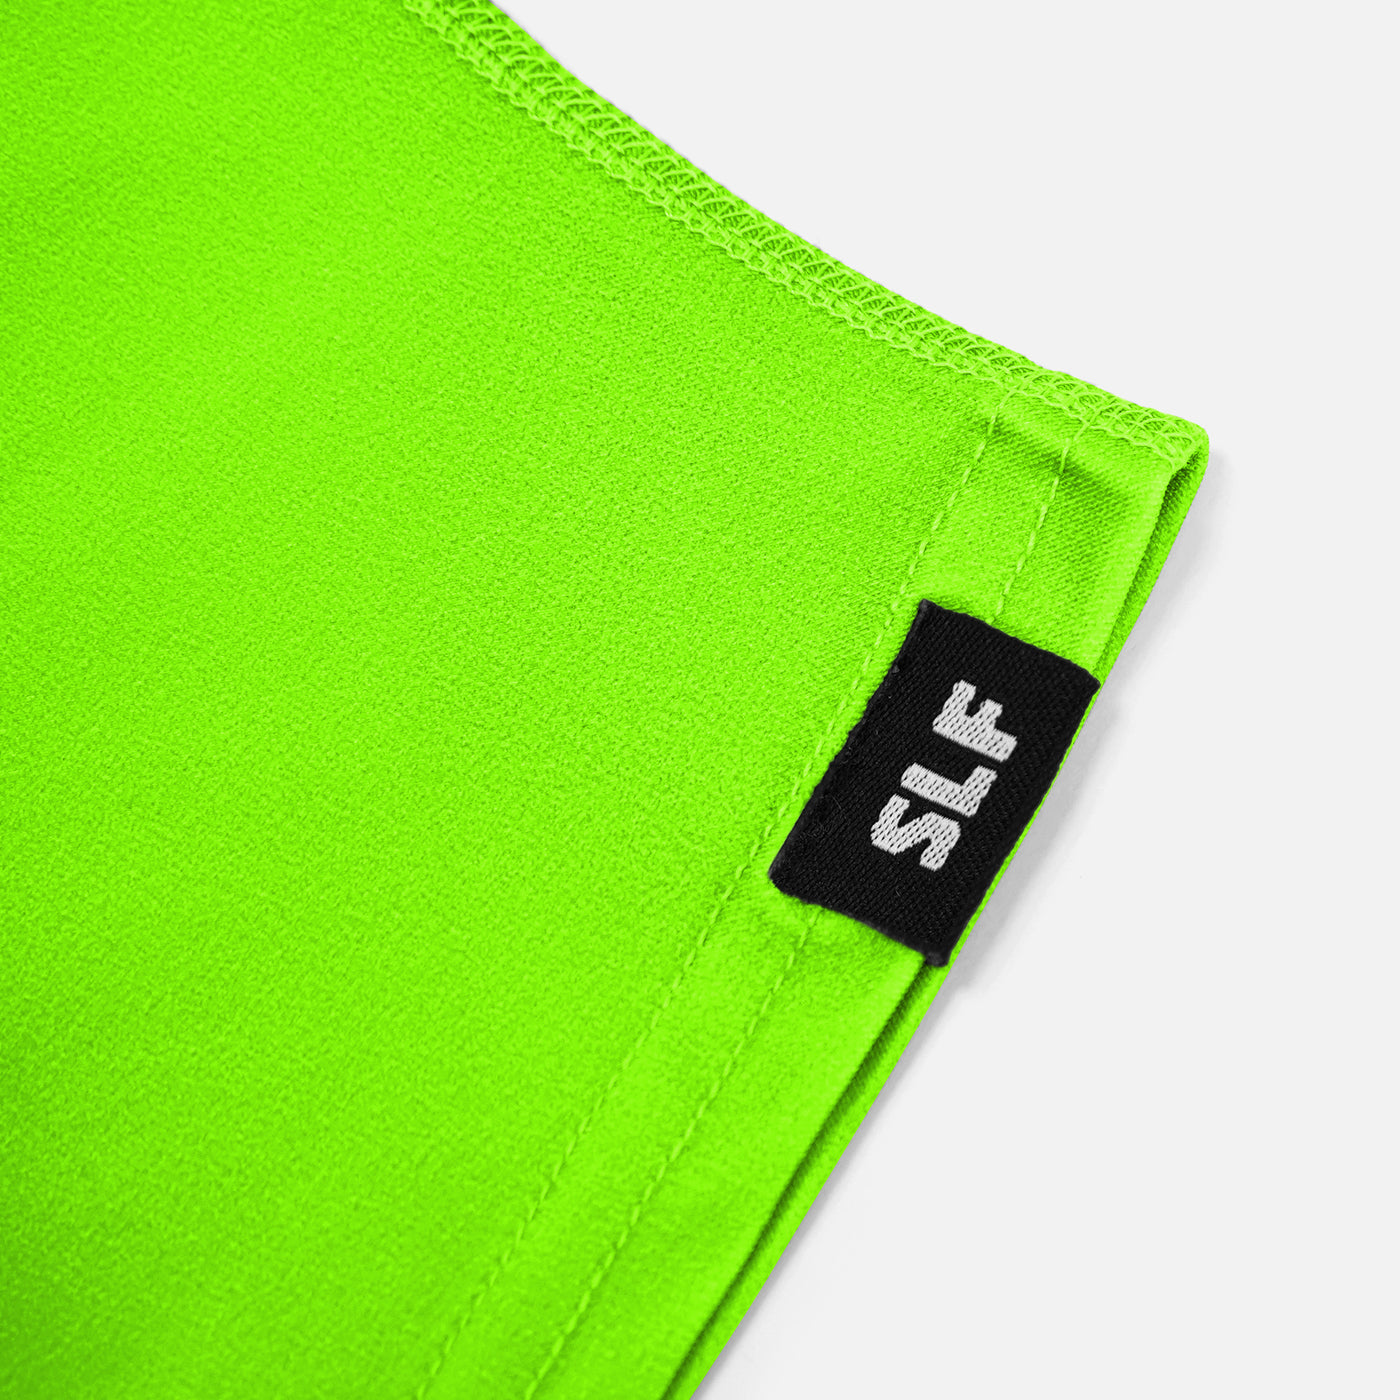 Hot Green Spats / Cleat Covers - Big